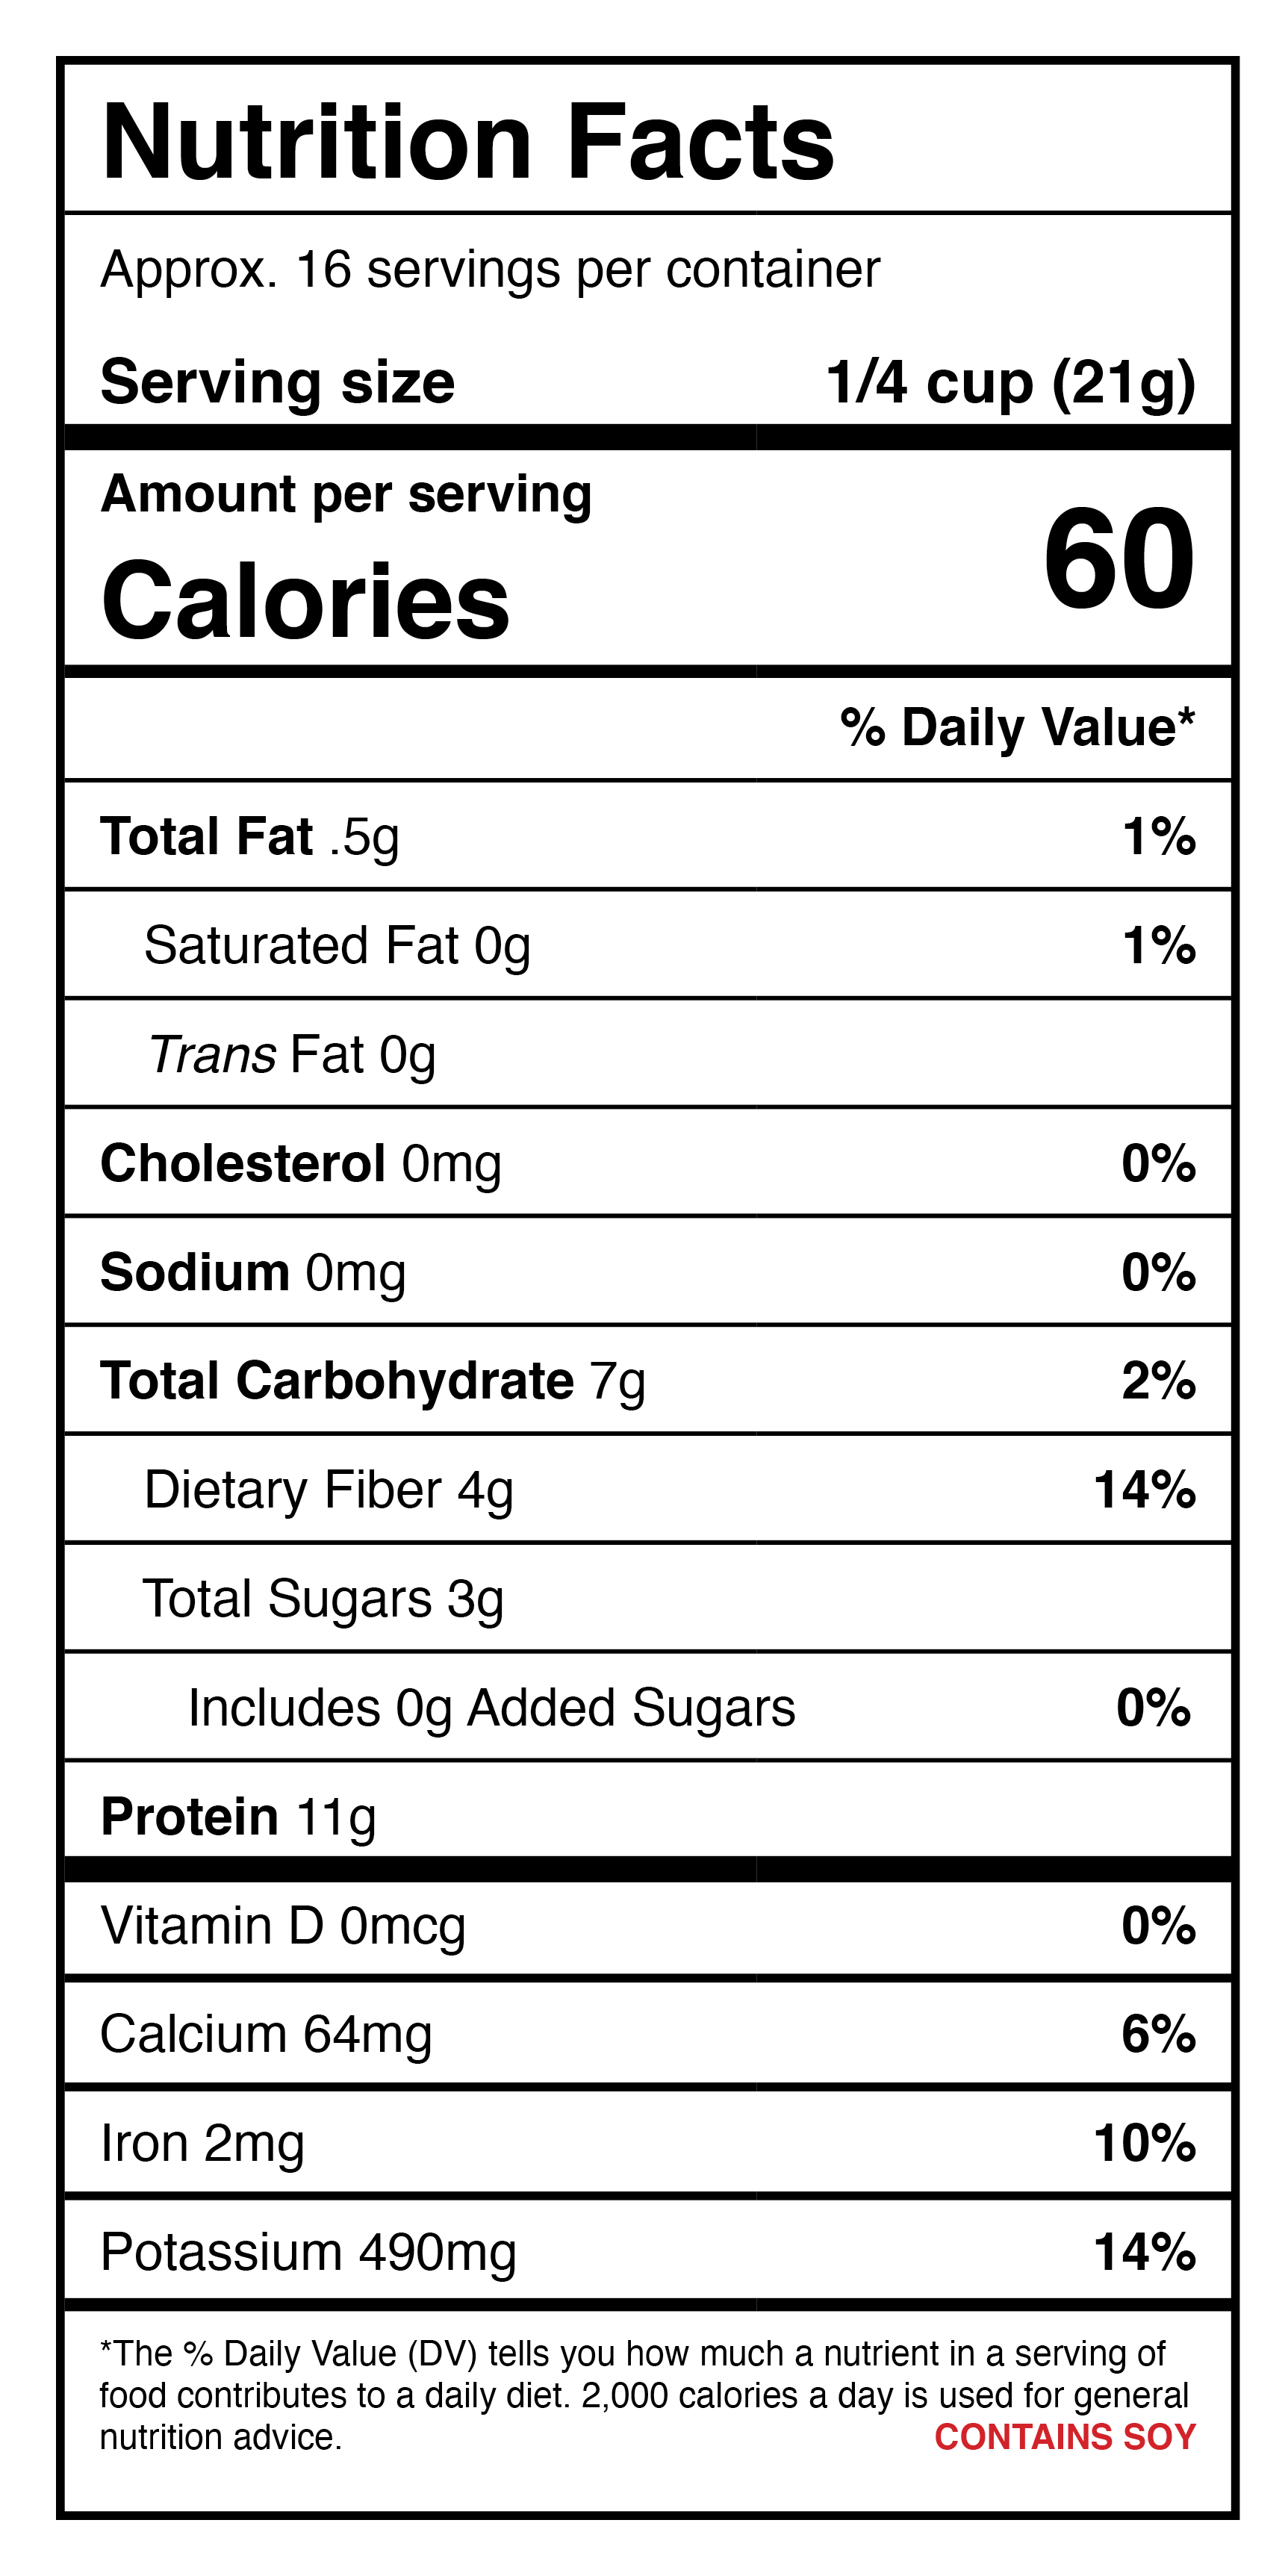 A nutrition label for a protein shake with Harmony House Chicken Style Chunks.